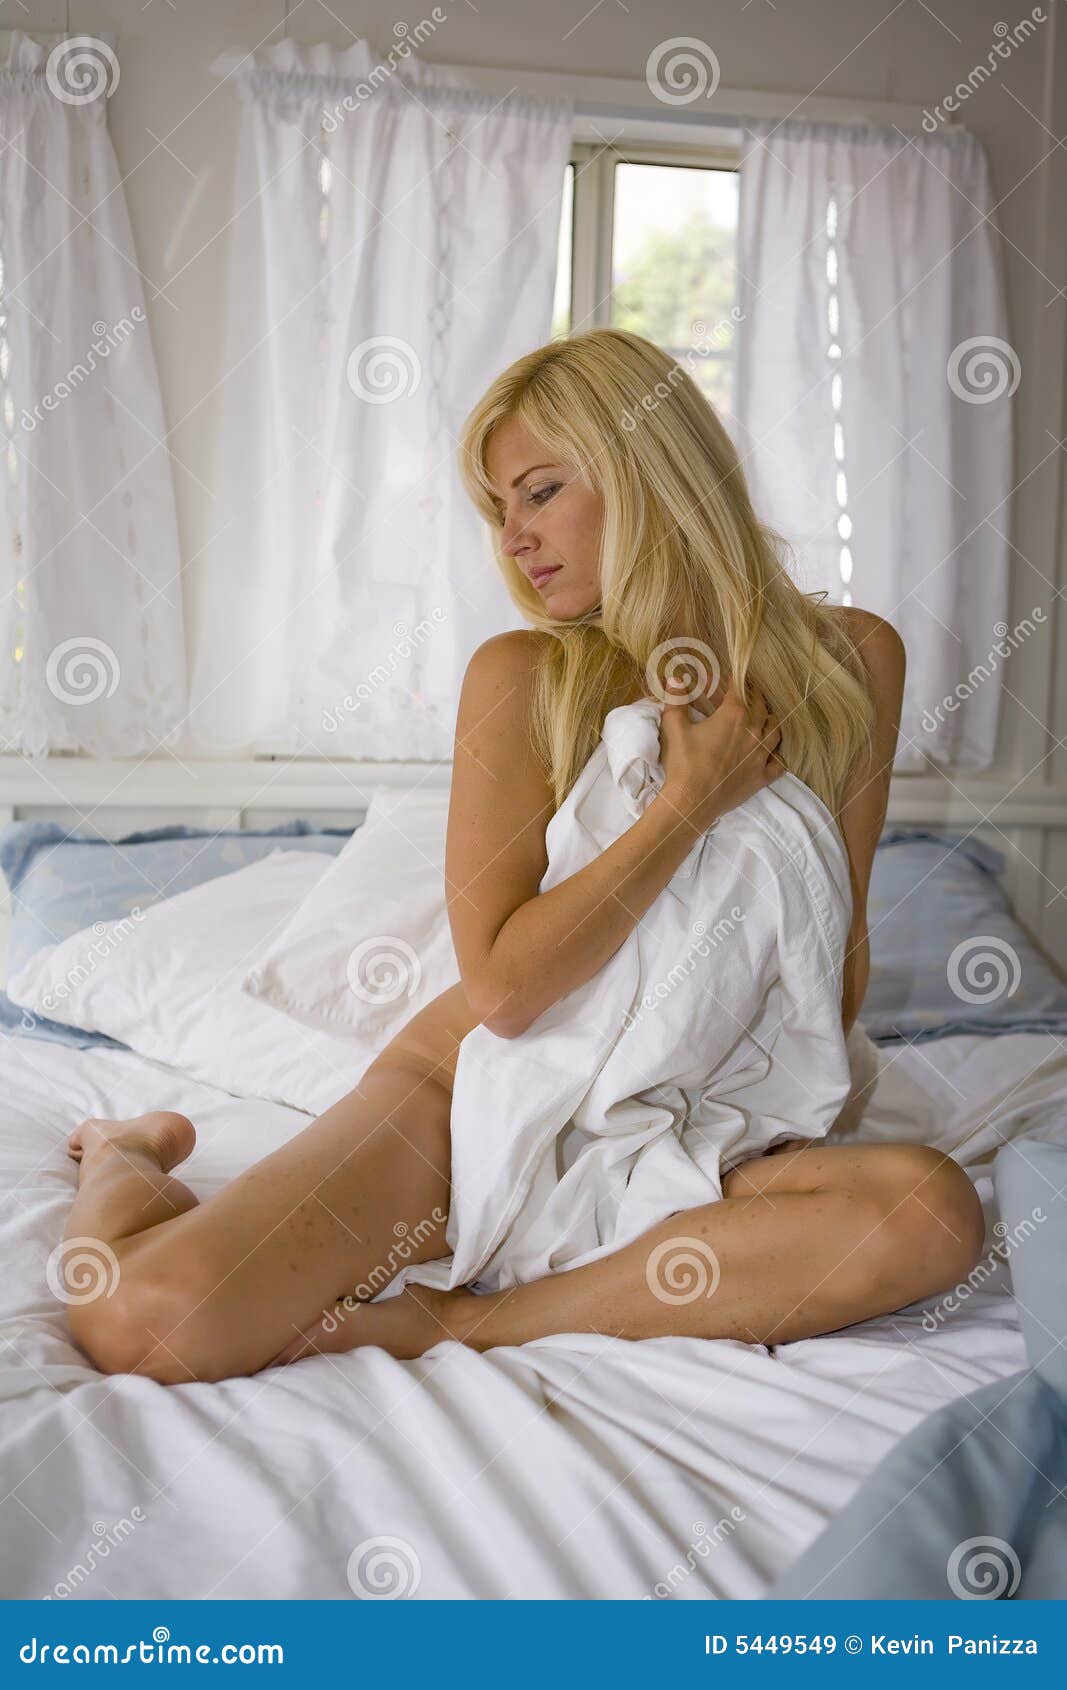 Nude Woman Sitting In Bed Royalty Free Stock Images Image 5449549